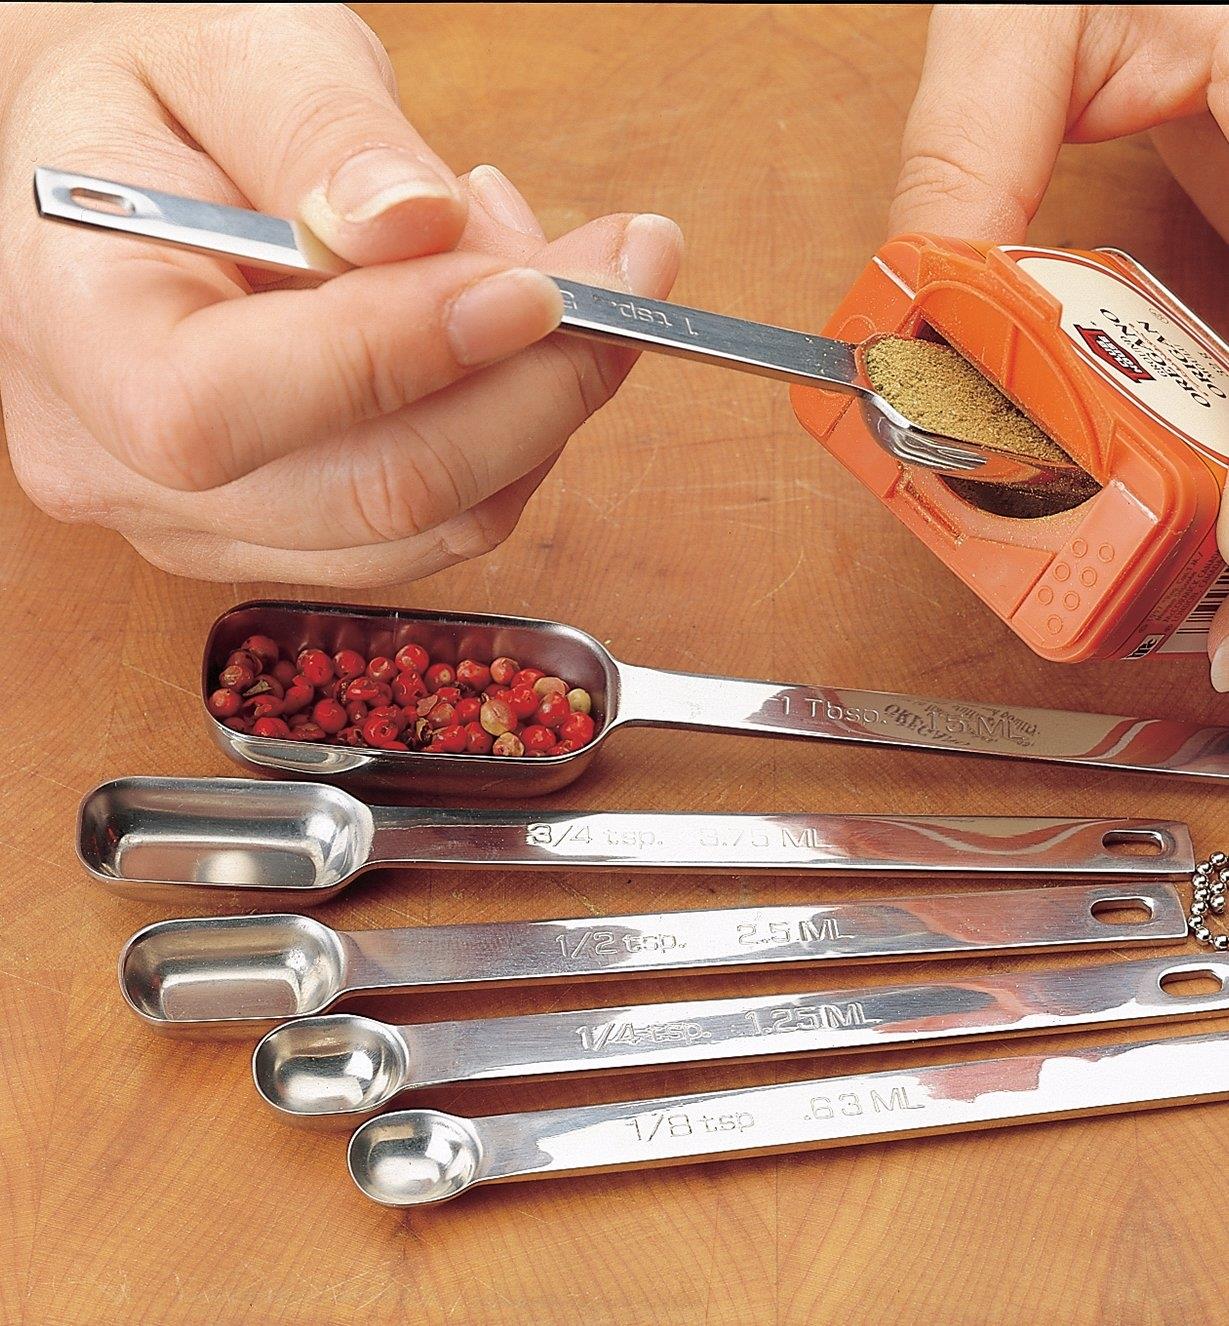 Inserting a measuring spoon into the slender opening of a spice container